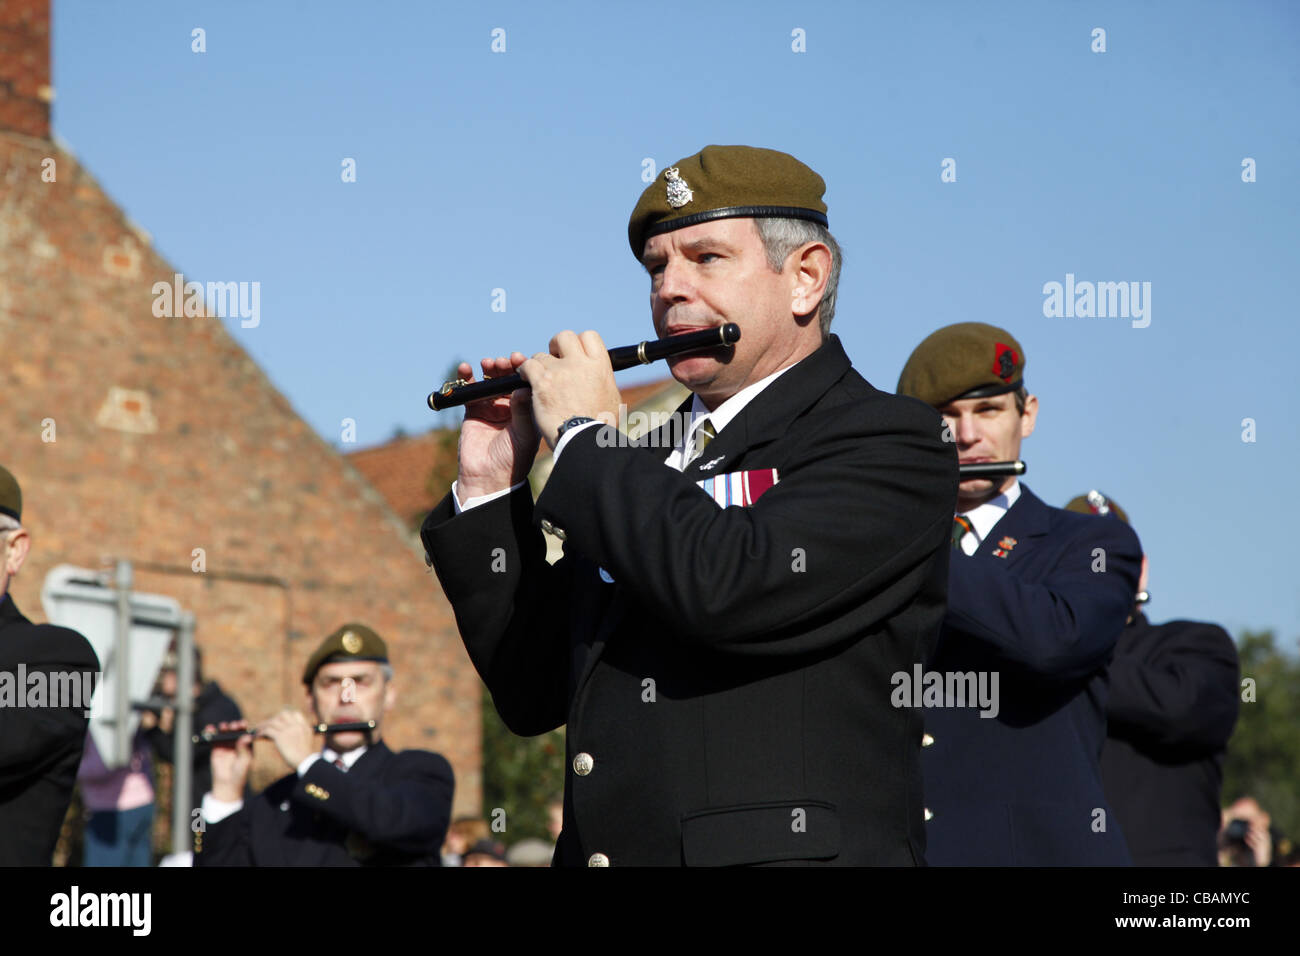 YORKSHIRE CORPS OF DRUMS FLUTIST PICKERING NORTH YORKSHIRE 15 October 2011 Stock Photo